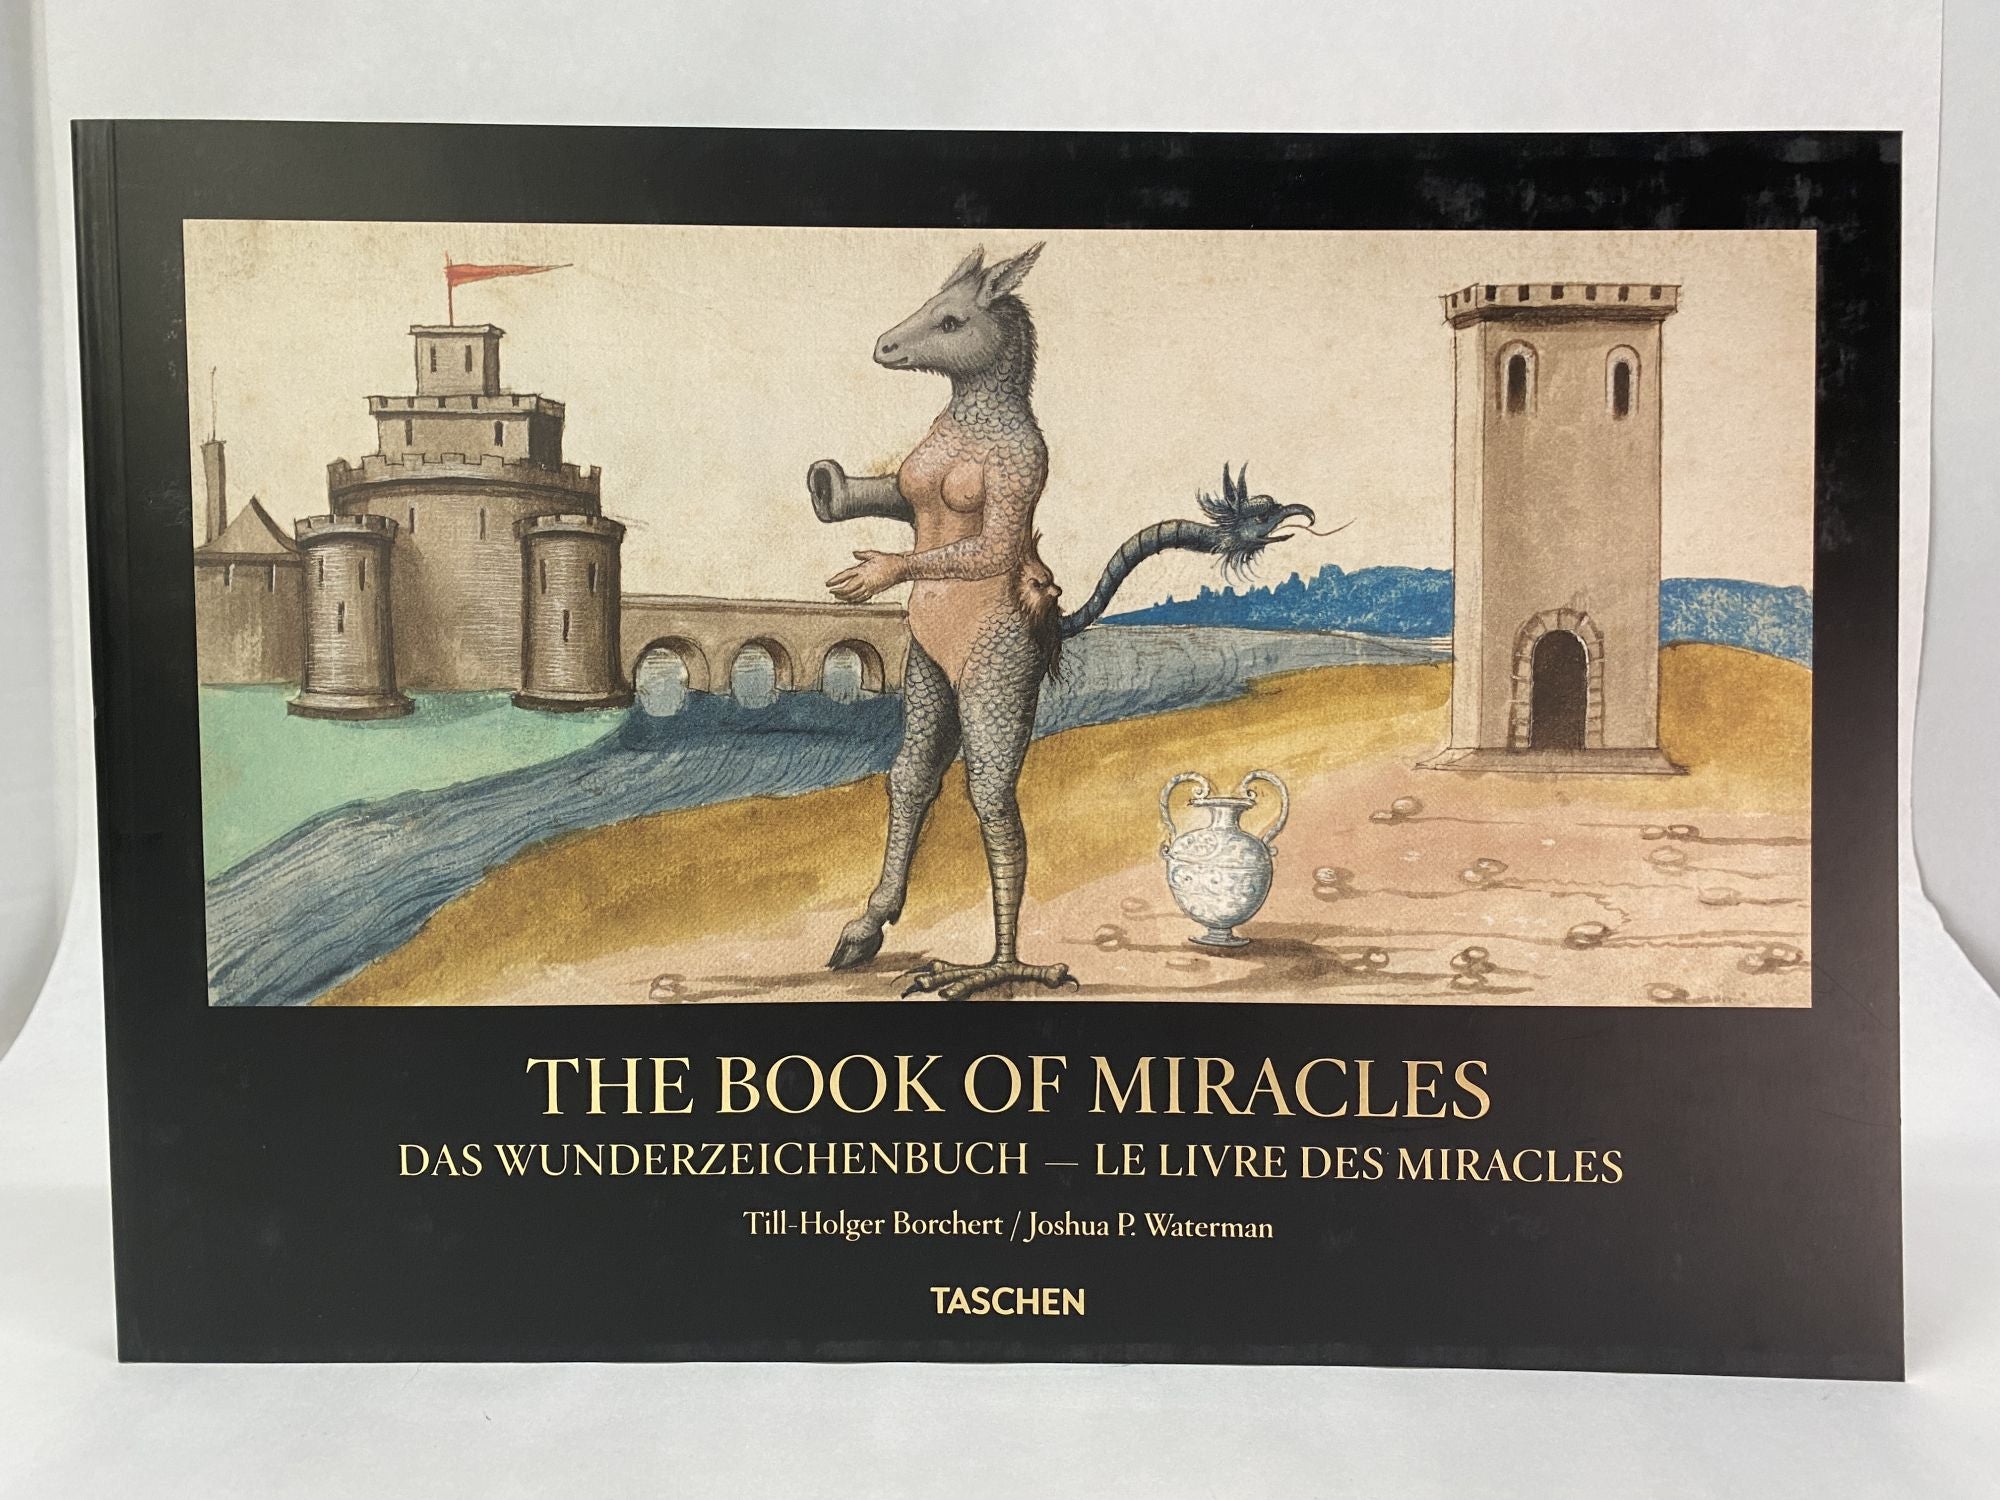 THE BOOK OF MIRACLES by Till-Holger Borchert on Atlanta Vintage Books